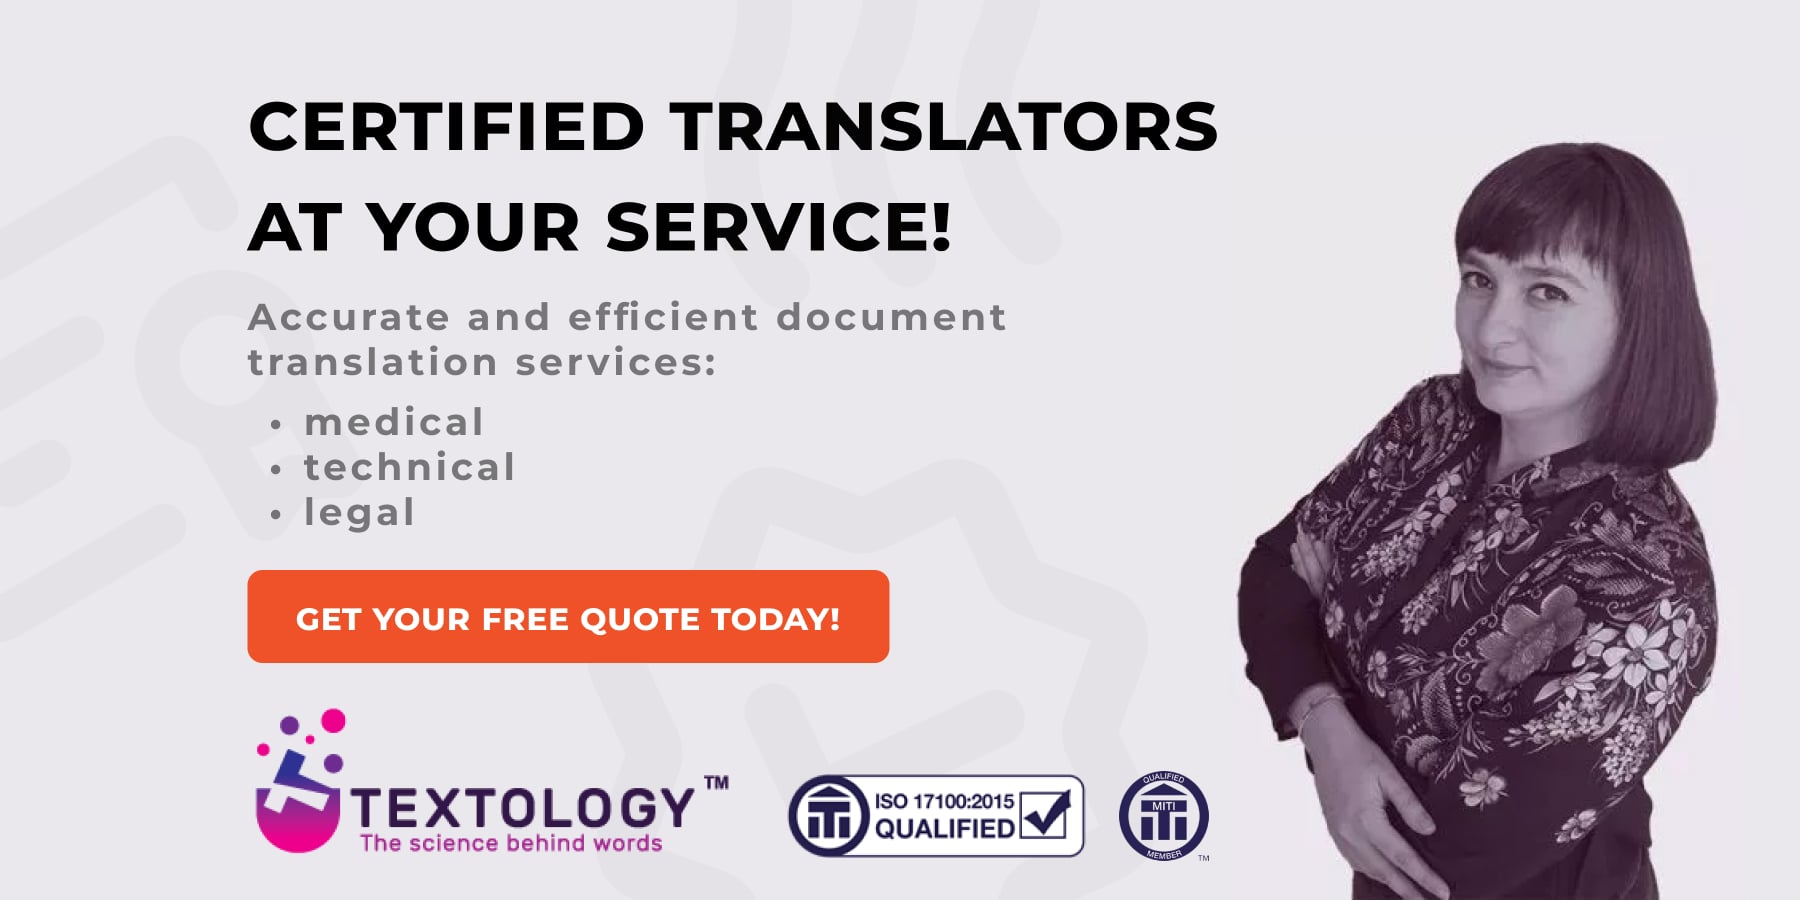 Certified translators at your service - Get free quote!